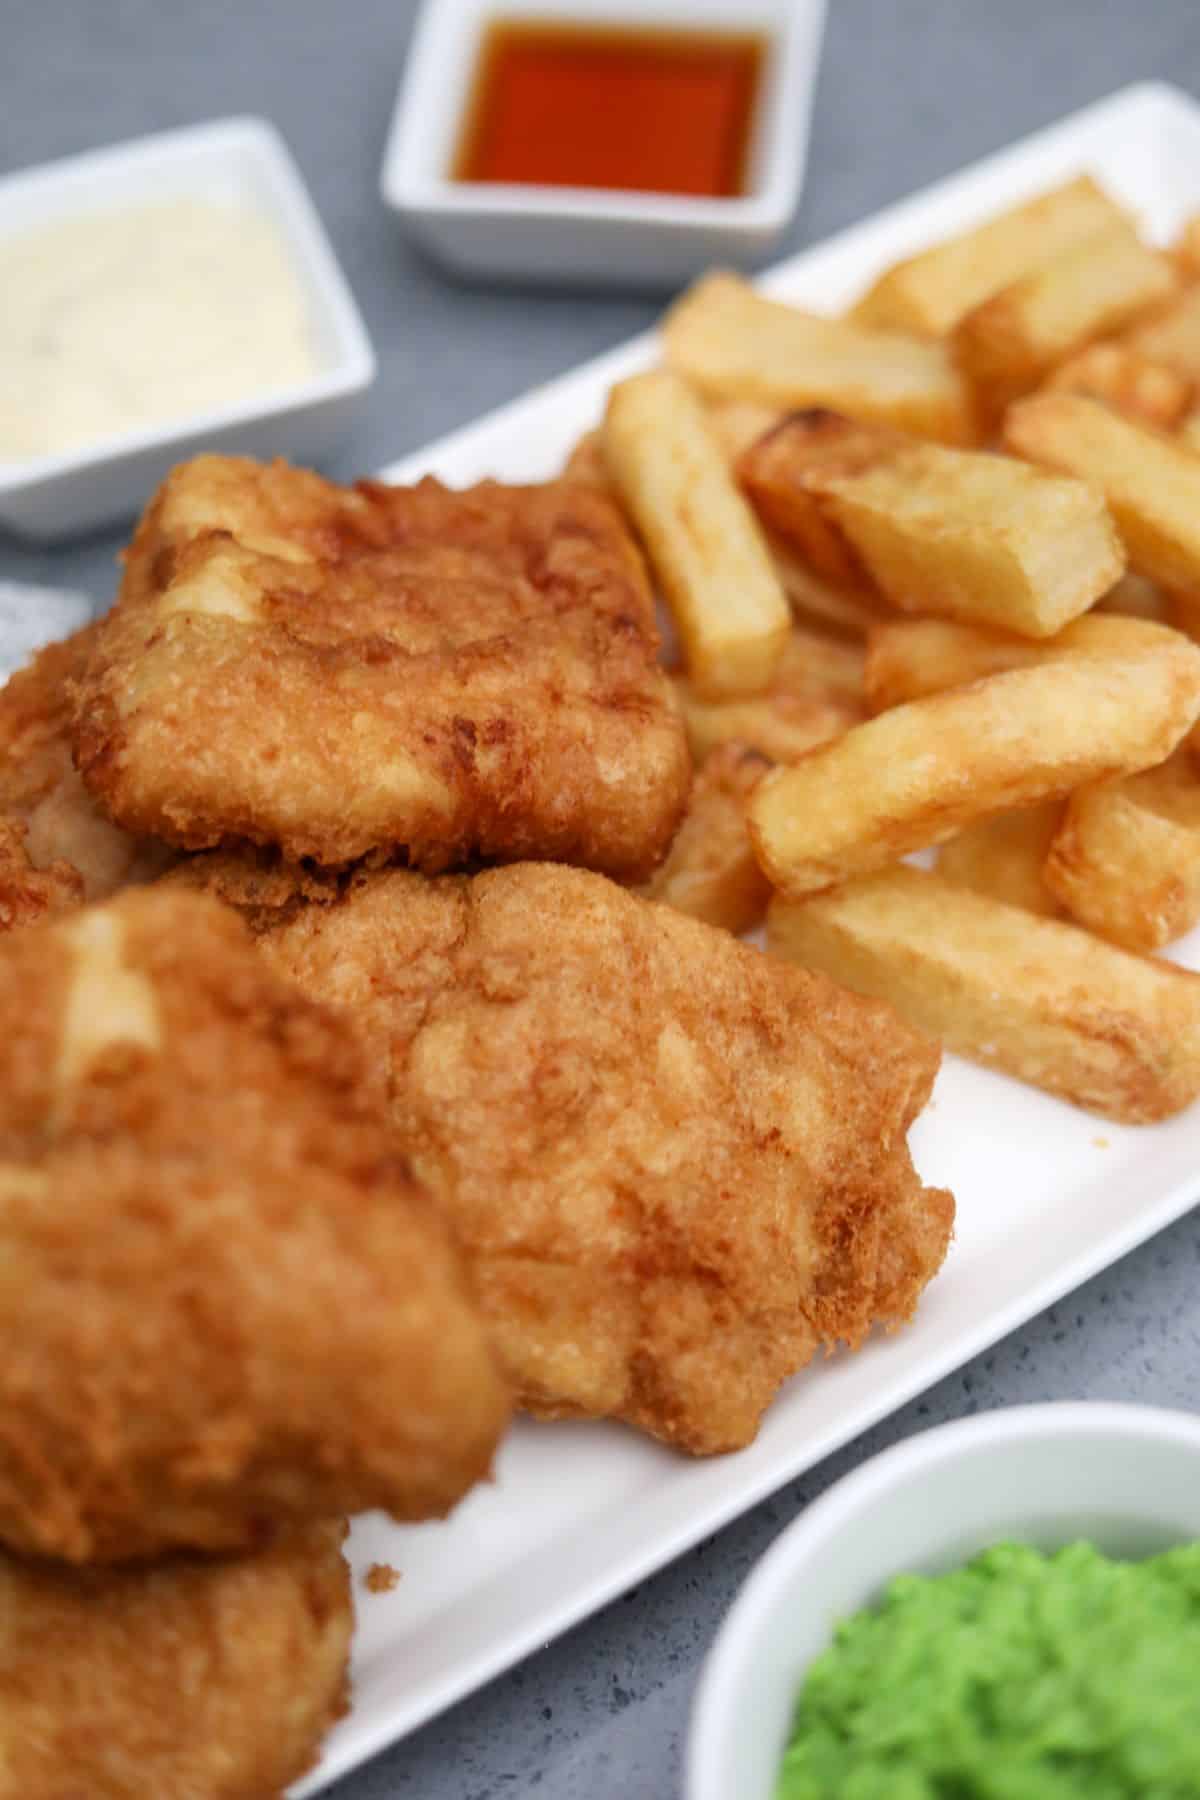 A platter of fish and chips